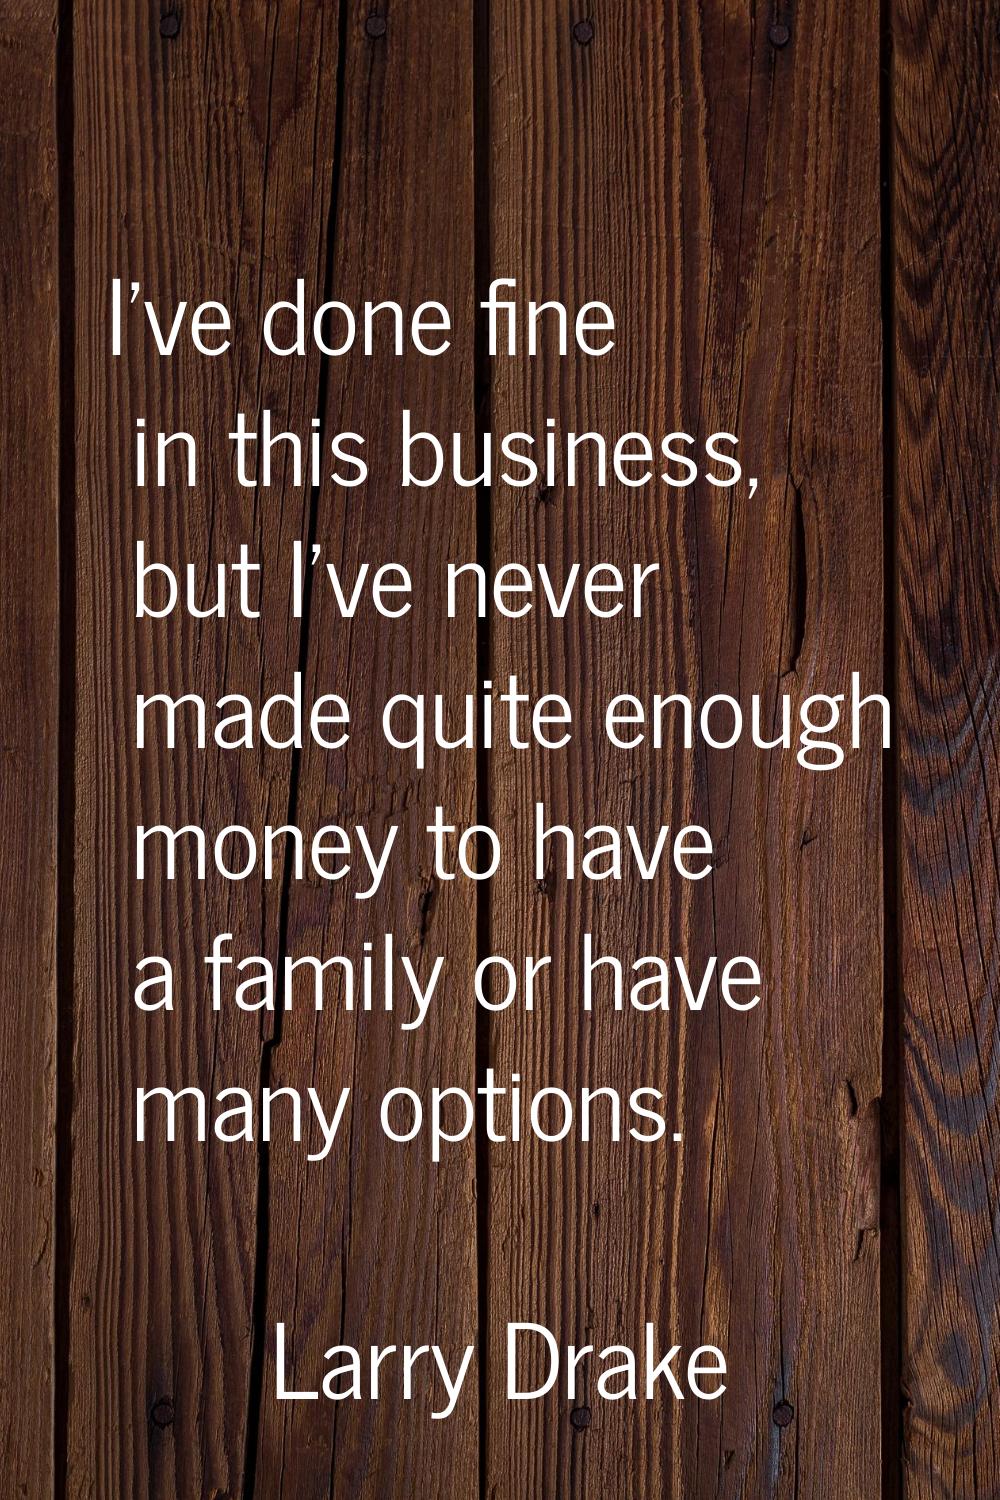 I've done fine in this business, but I've never made quite enough money to have a family or have ma